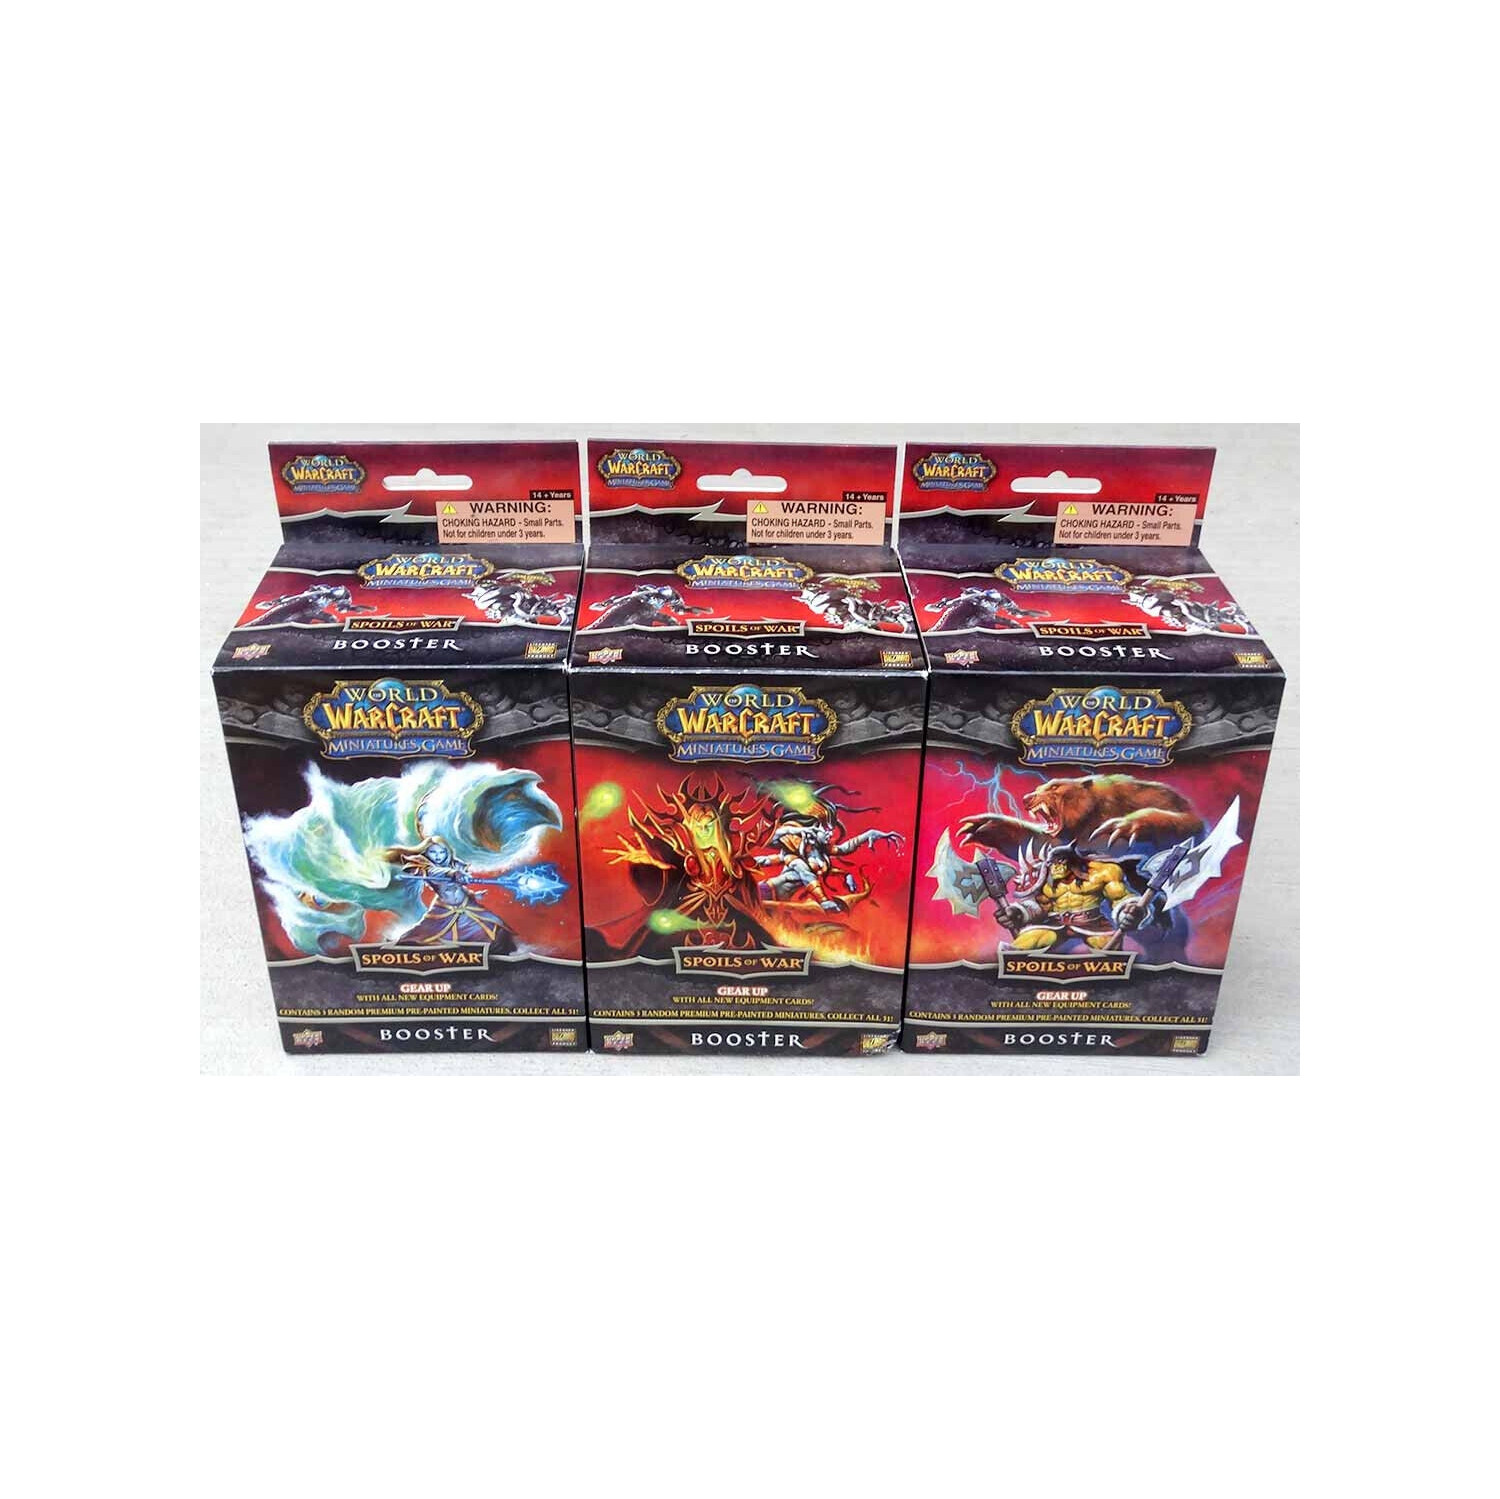 World of Warcraft Miniatures Core Set - 3 Booster Boxes (set of 3)